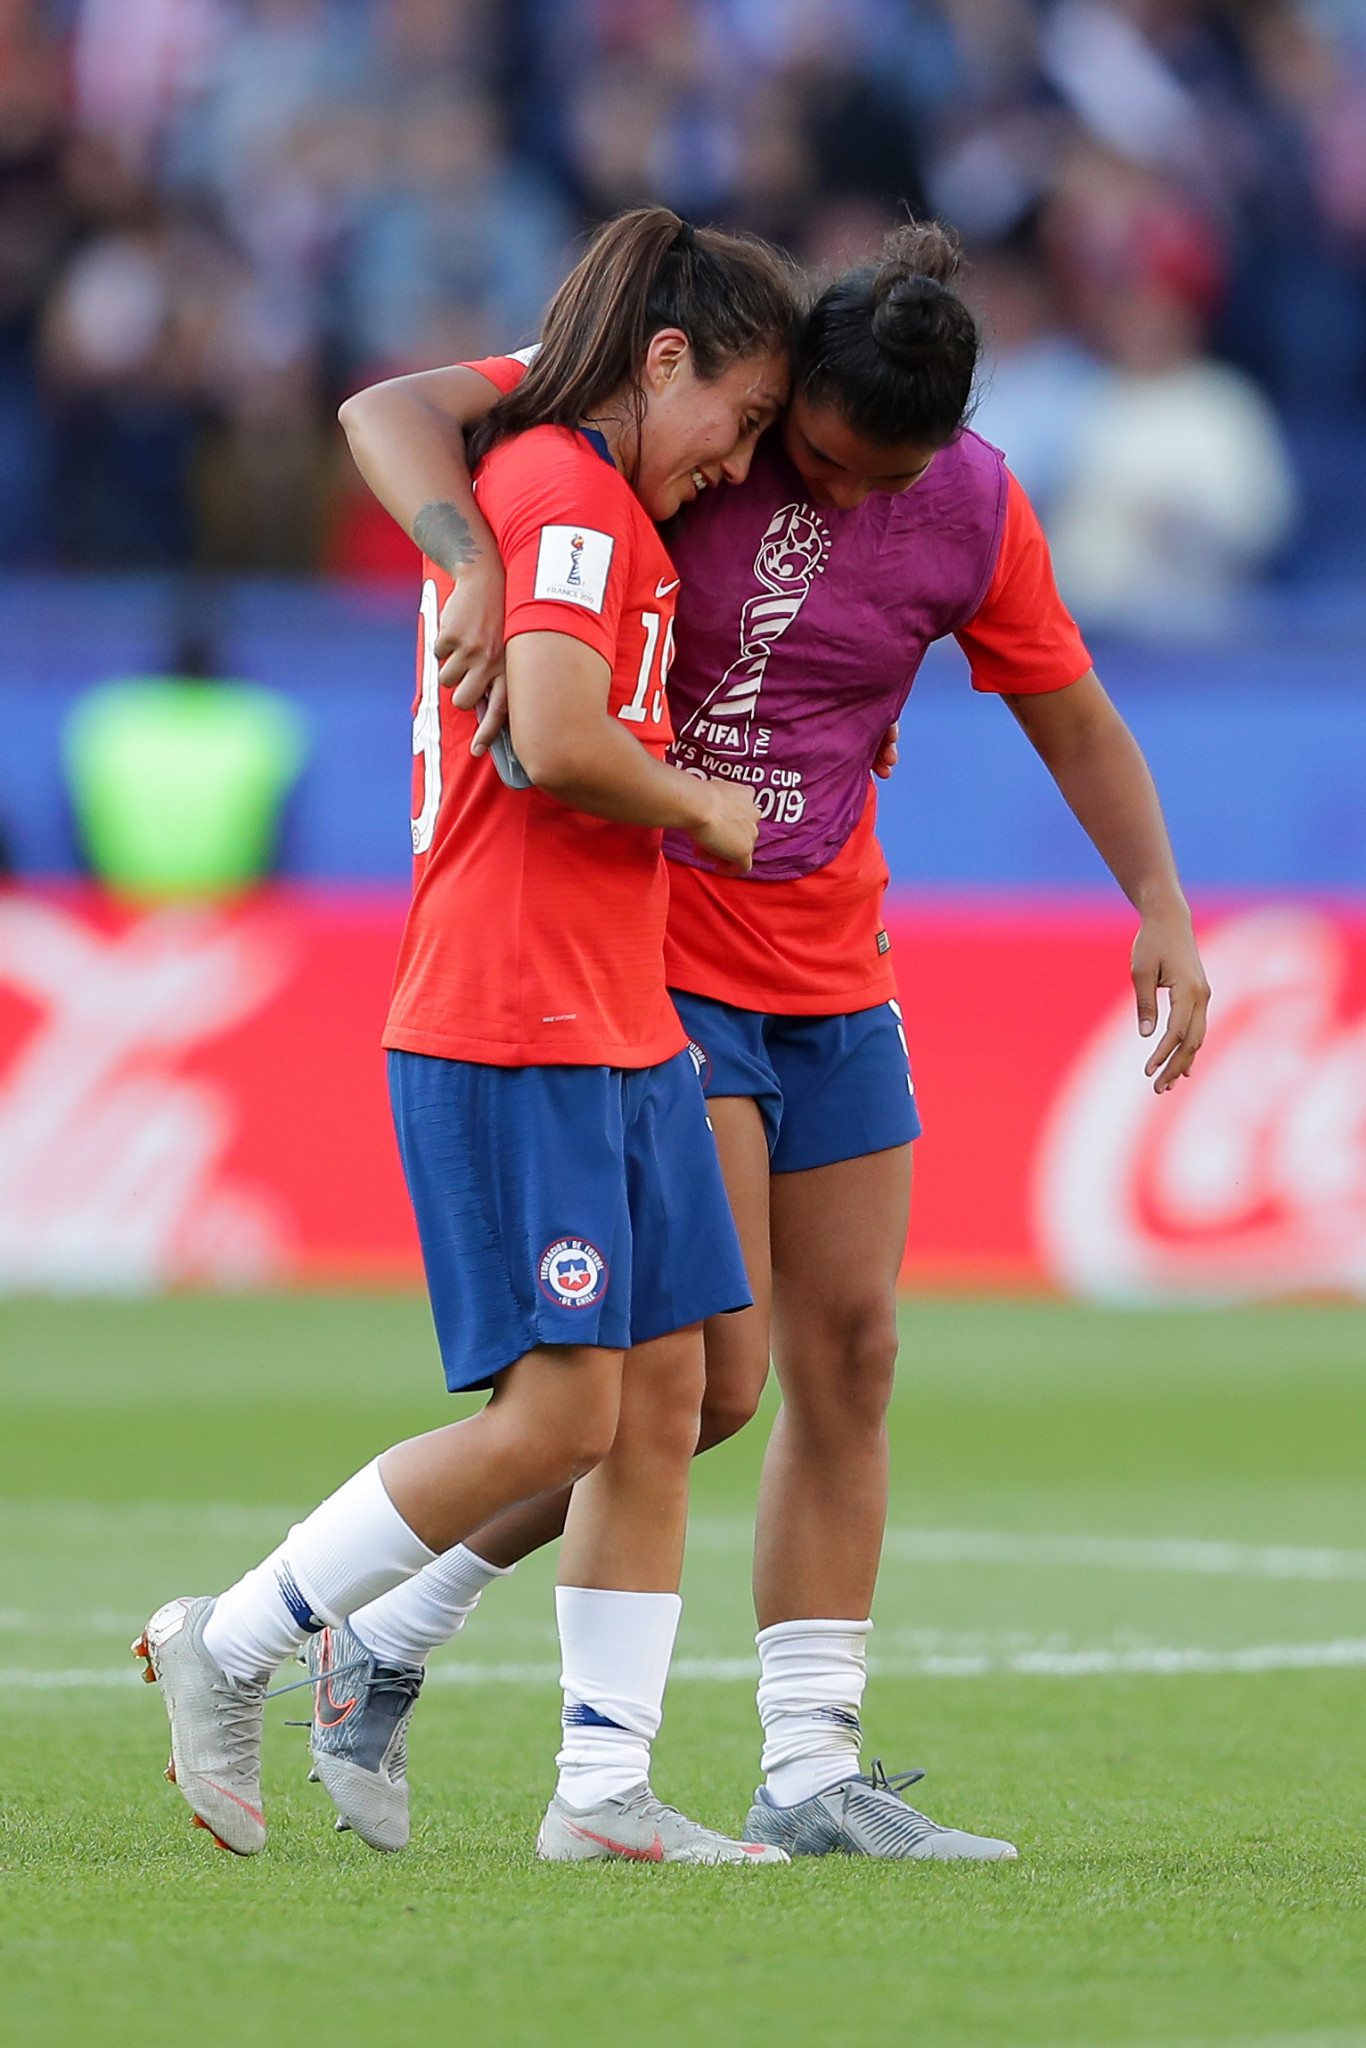 Chile's Yessenia Huenteo is consoled by a team mate ©Getty Images 